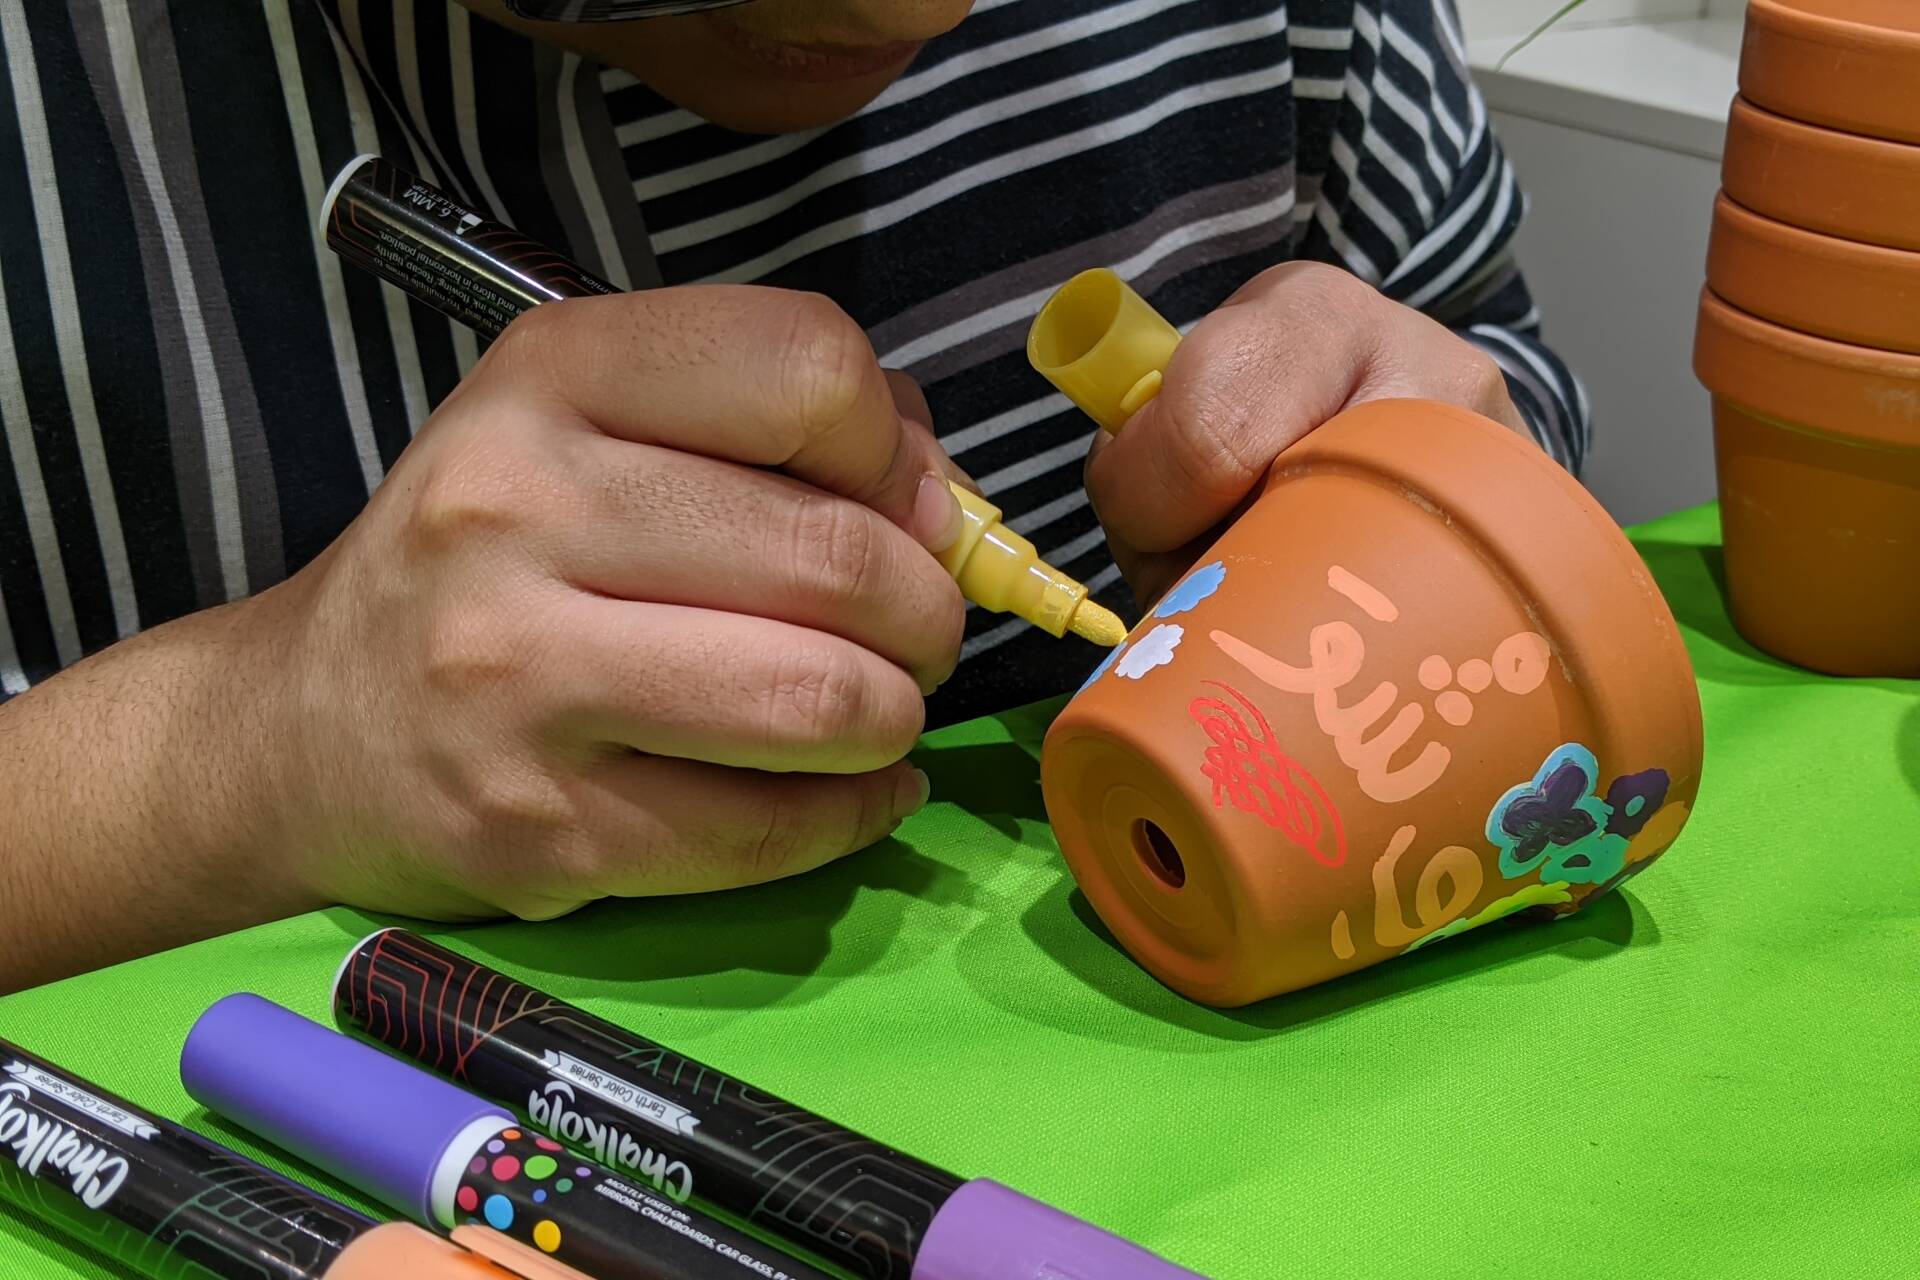 A student drawing on a terracotta pot against a green tablecloth